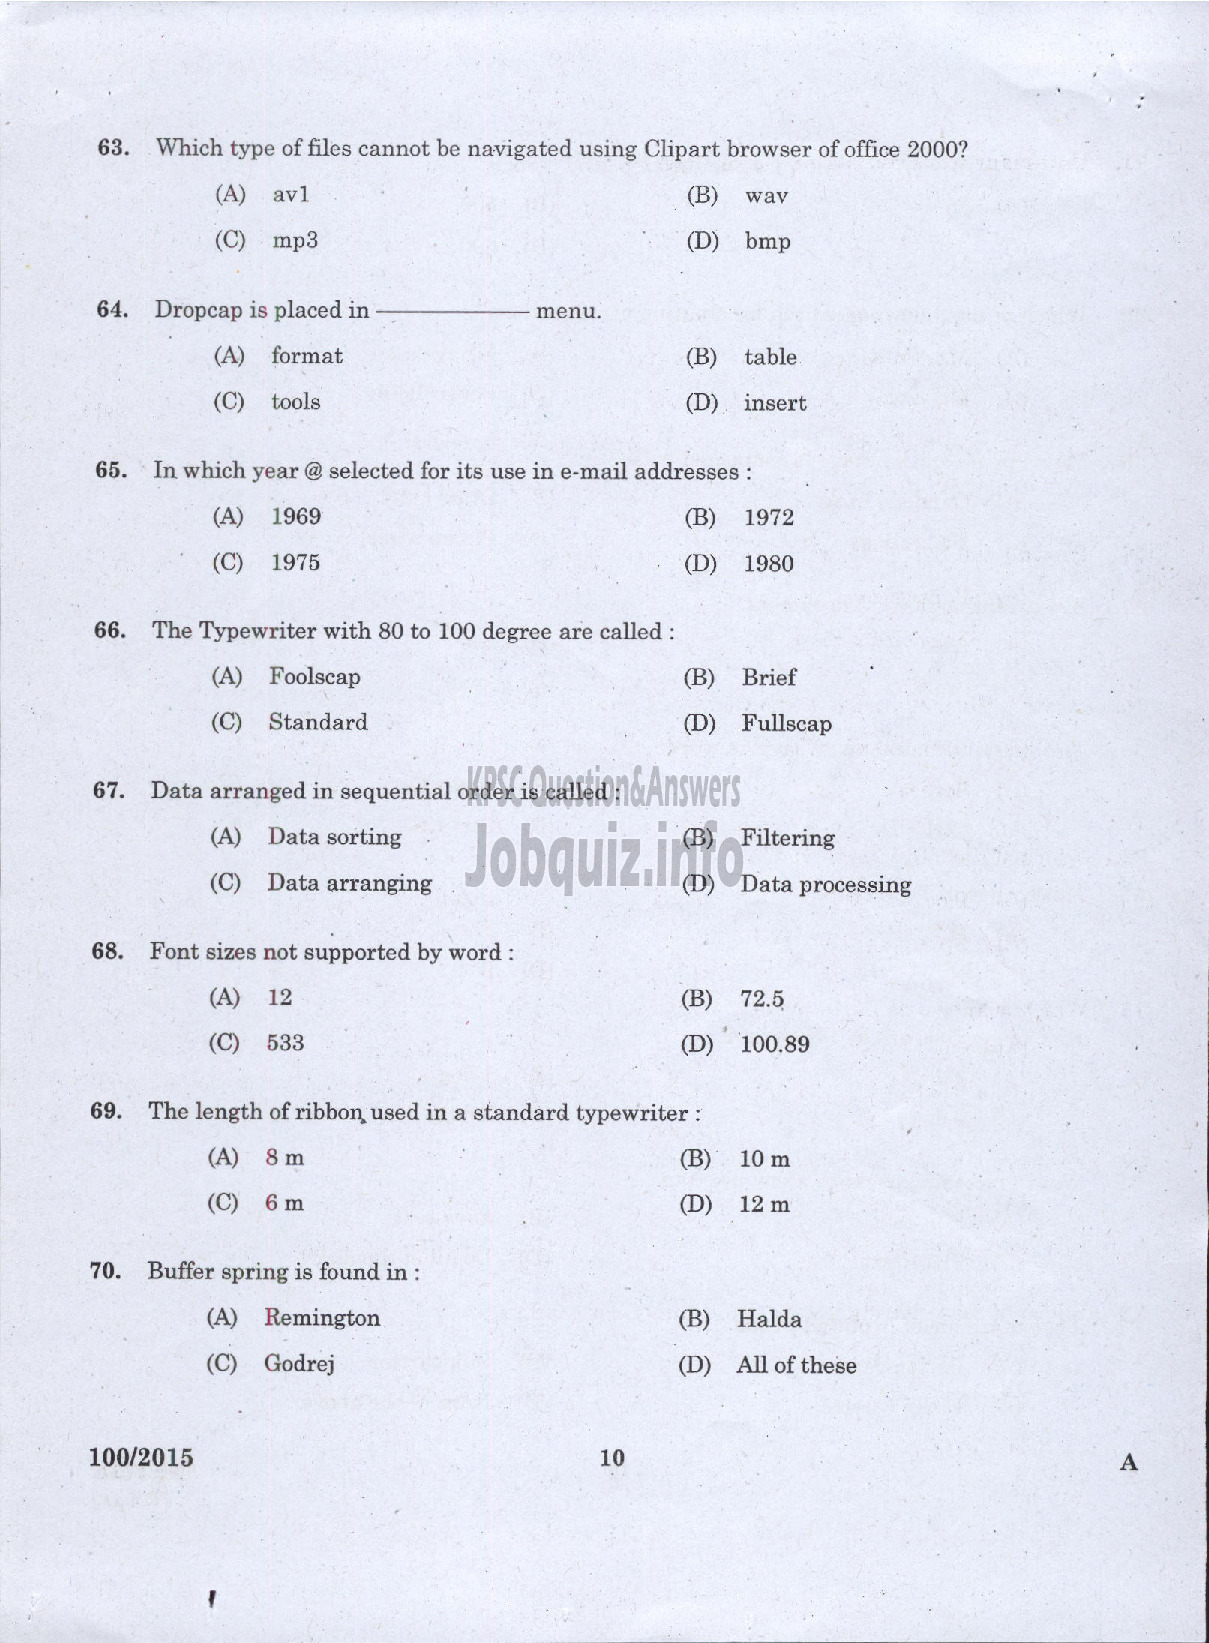 Kerala PSC Question Paper - TYYPIST GRADE II / STENO TYPIST / CLERK TYPIST / TYPIST KERALA STATE HOUSING BOARD / KERALA SHIPPING AND INLAND NAVIGATION CORP LTD / VARIOUS / KERALA ELECTRICAL AND ALLIED ENGINEERING COMPANY LTD-8